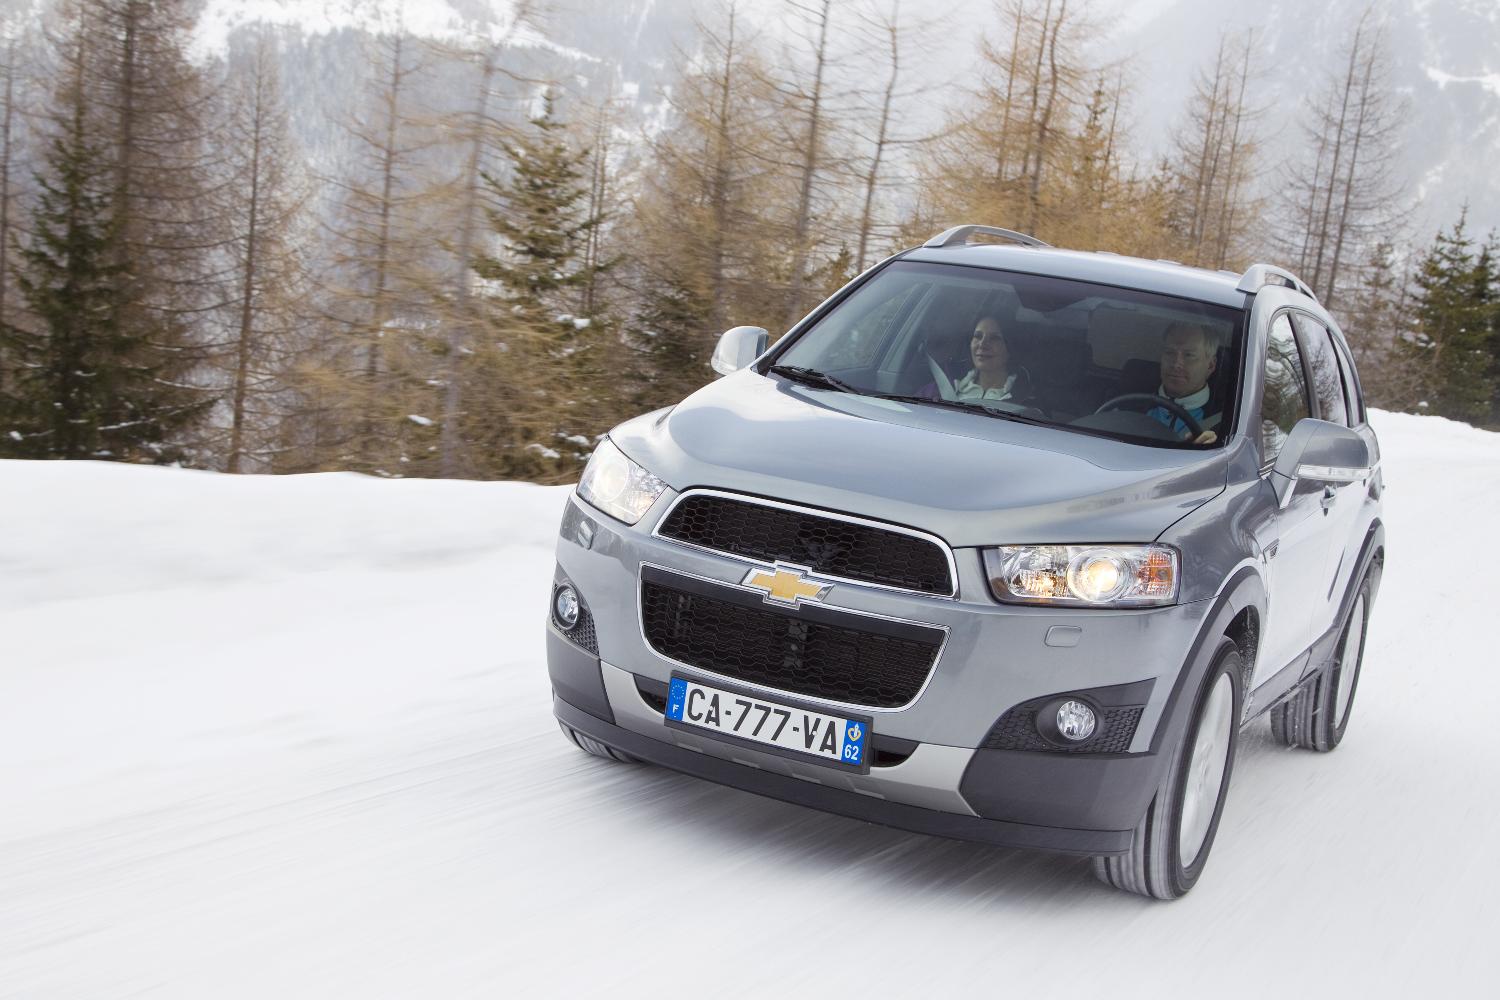 It's positively Captiva-ting: The 2014 Chevrolet Captiva Review | OSV